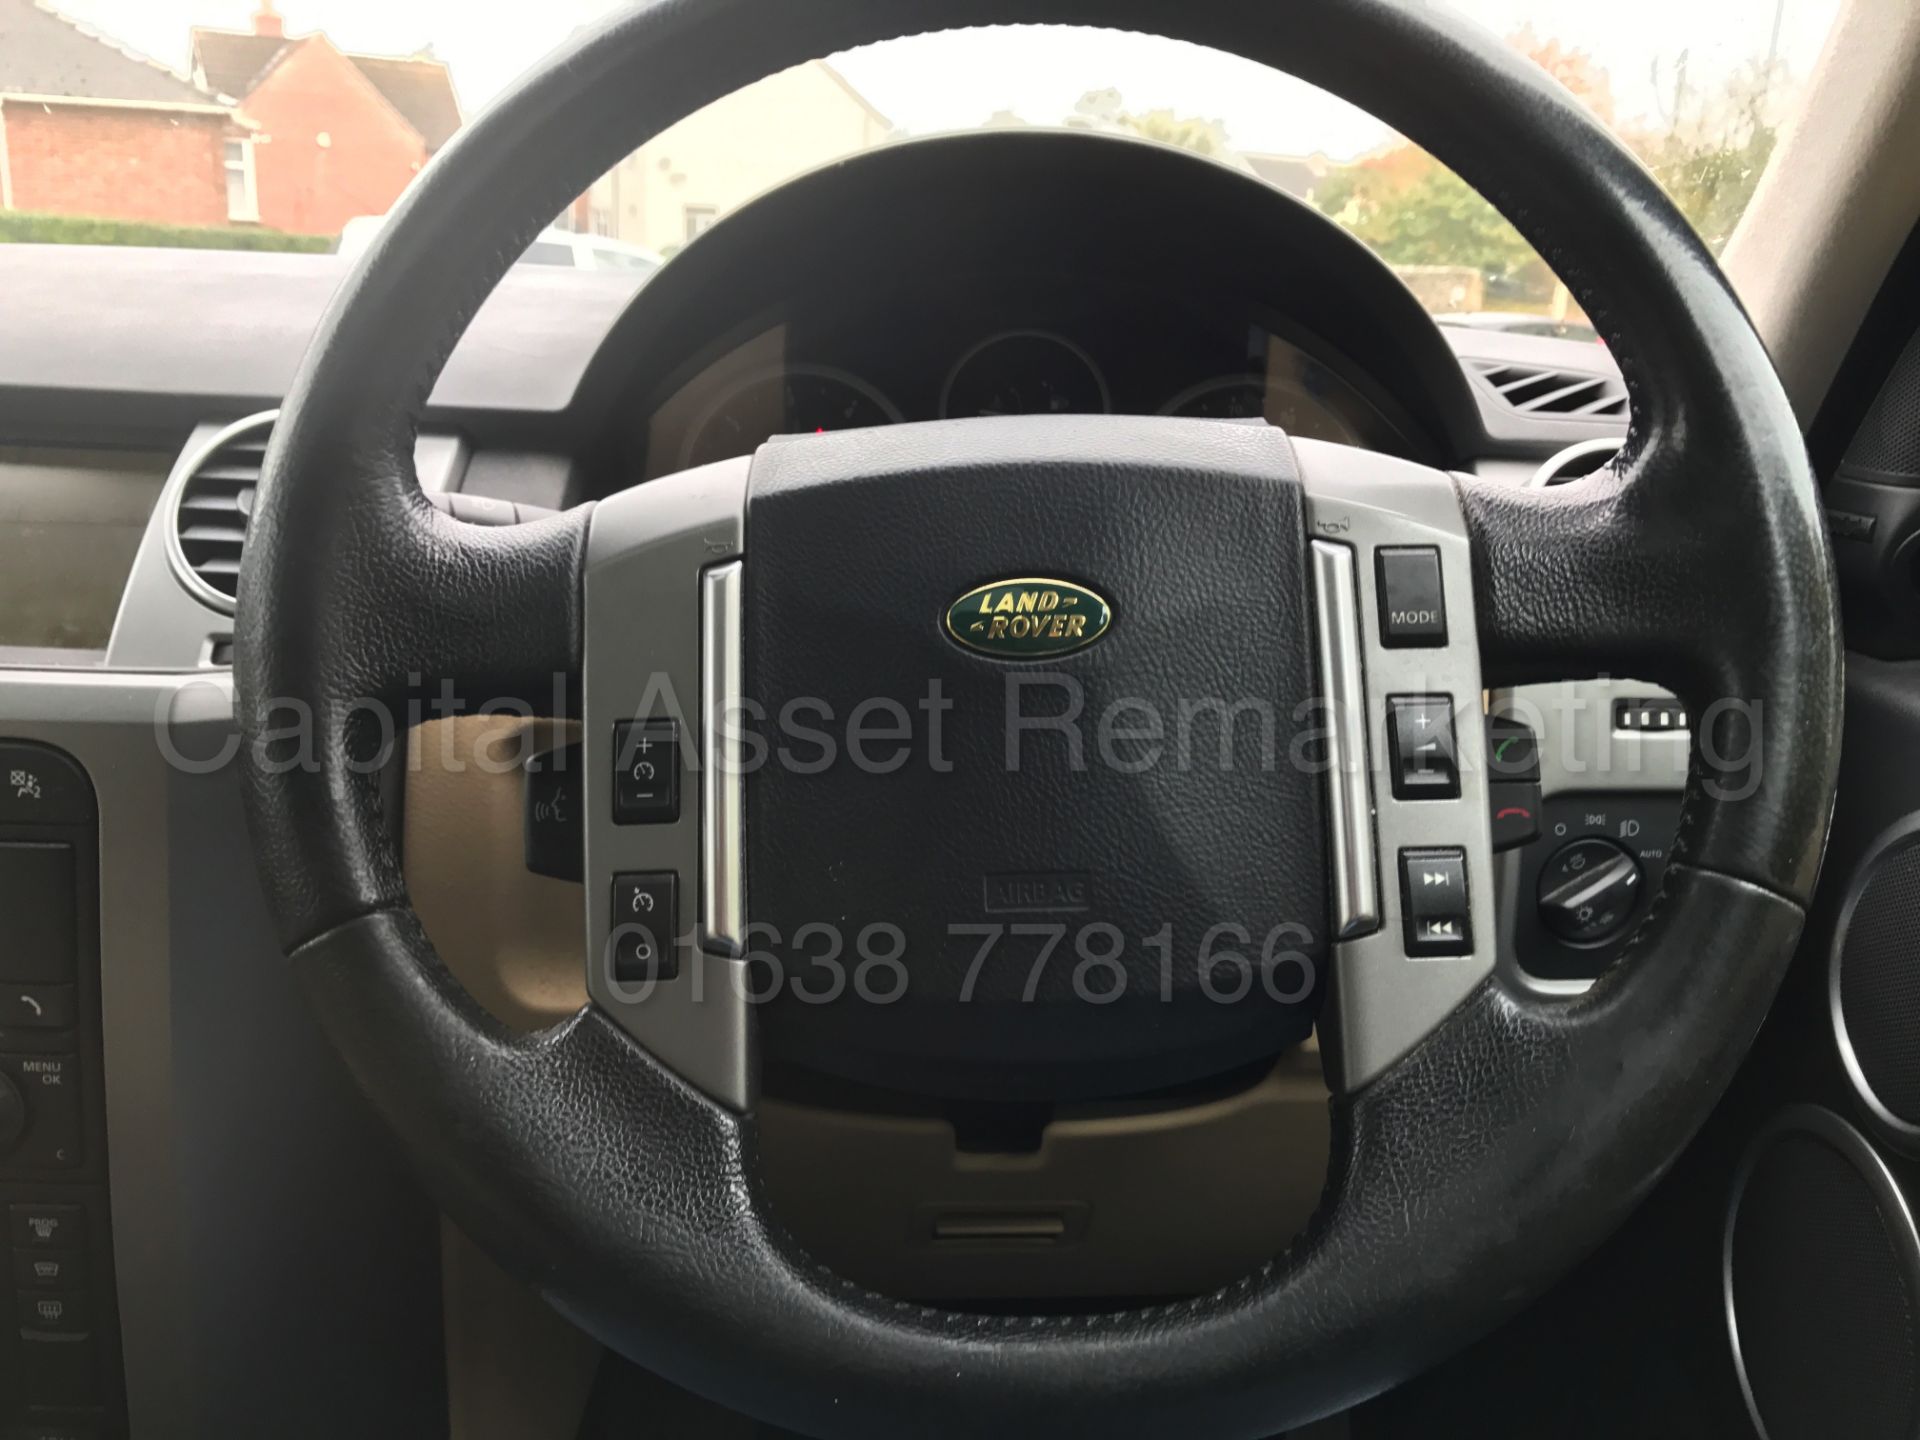 LAND ROVER DISCOVERY 3 HSE (2008 - 08 REG) 'TDV6 - AUTO - LEATHER - SAT NAV - 7 SEATER' *1 OWNER* - Image 36 of 37